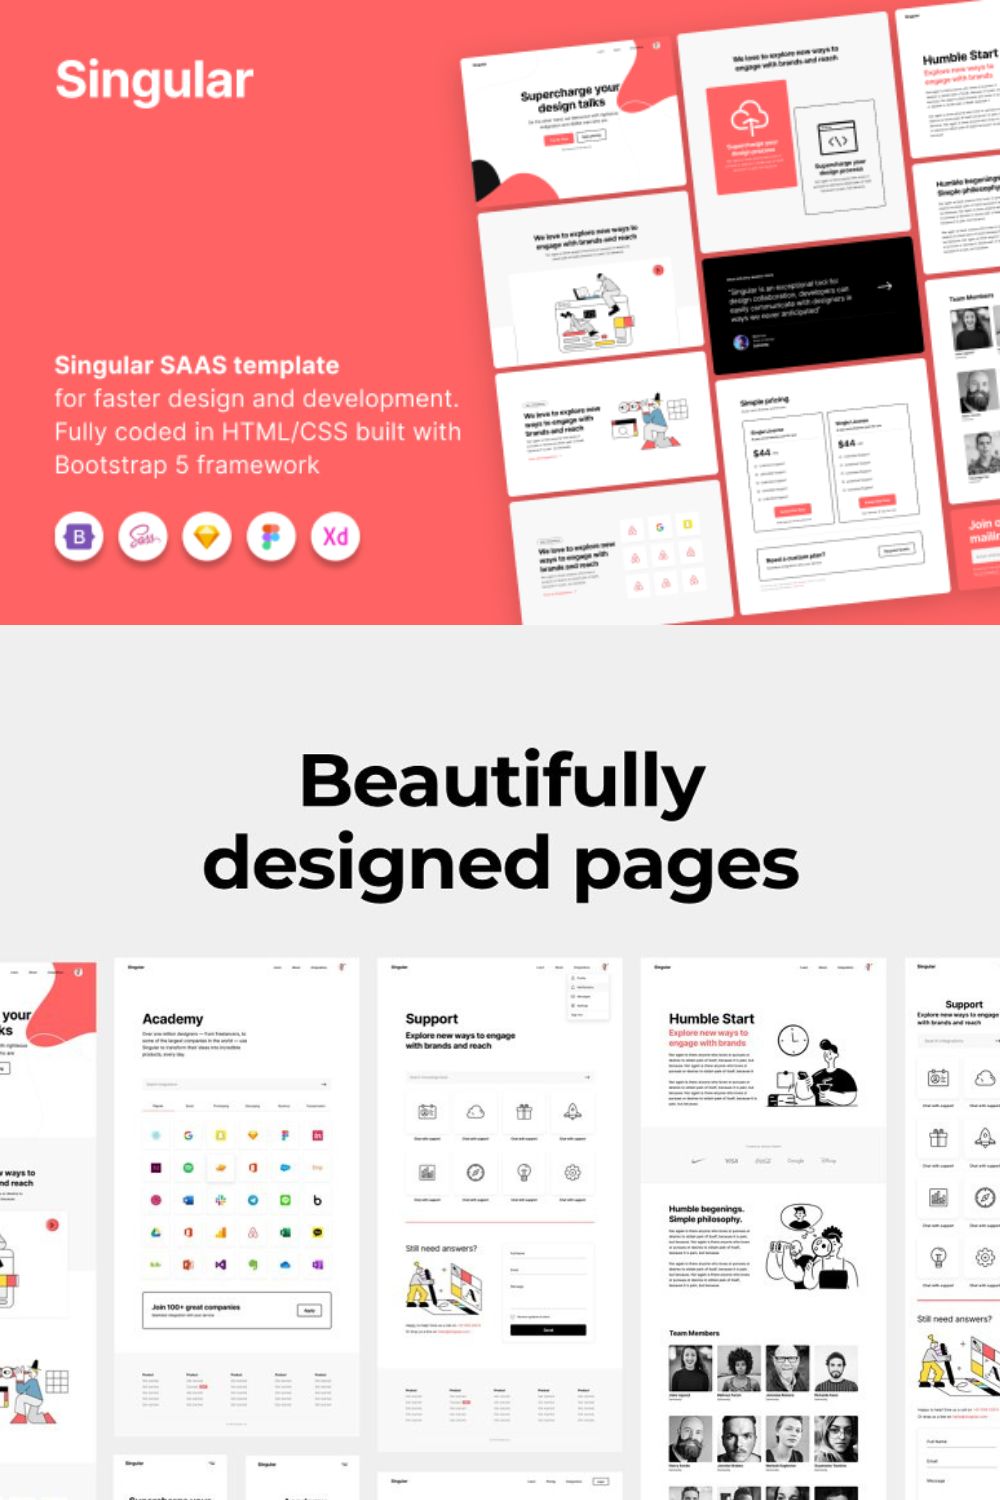 Singular SAAS Website Template with Bootstrap pinterest image.